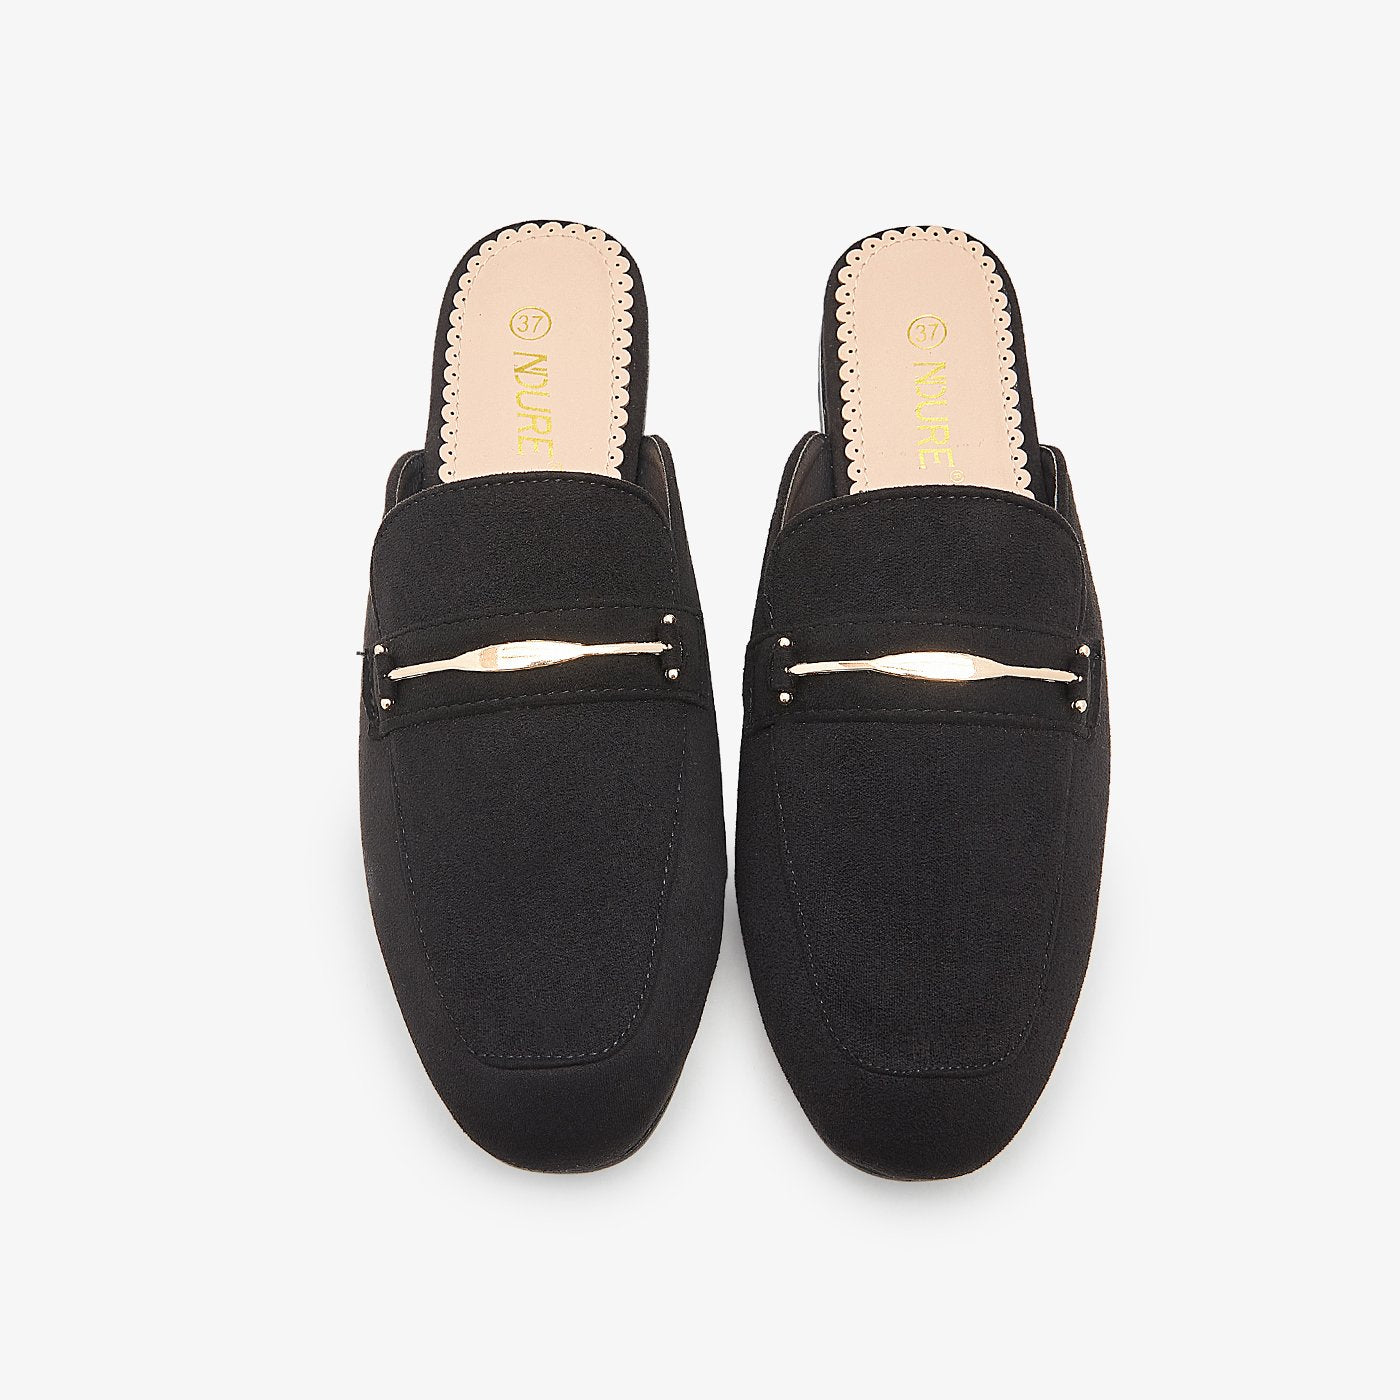 Sophisticated Mules for Women